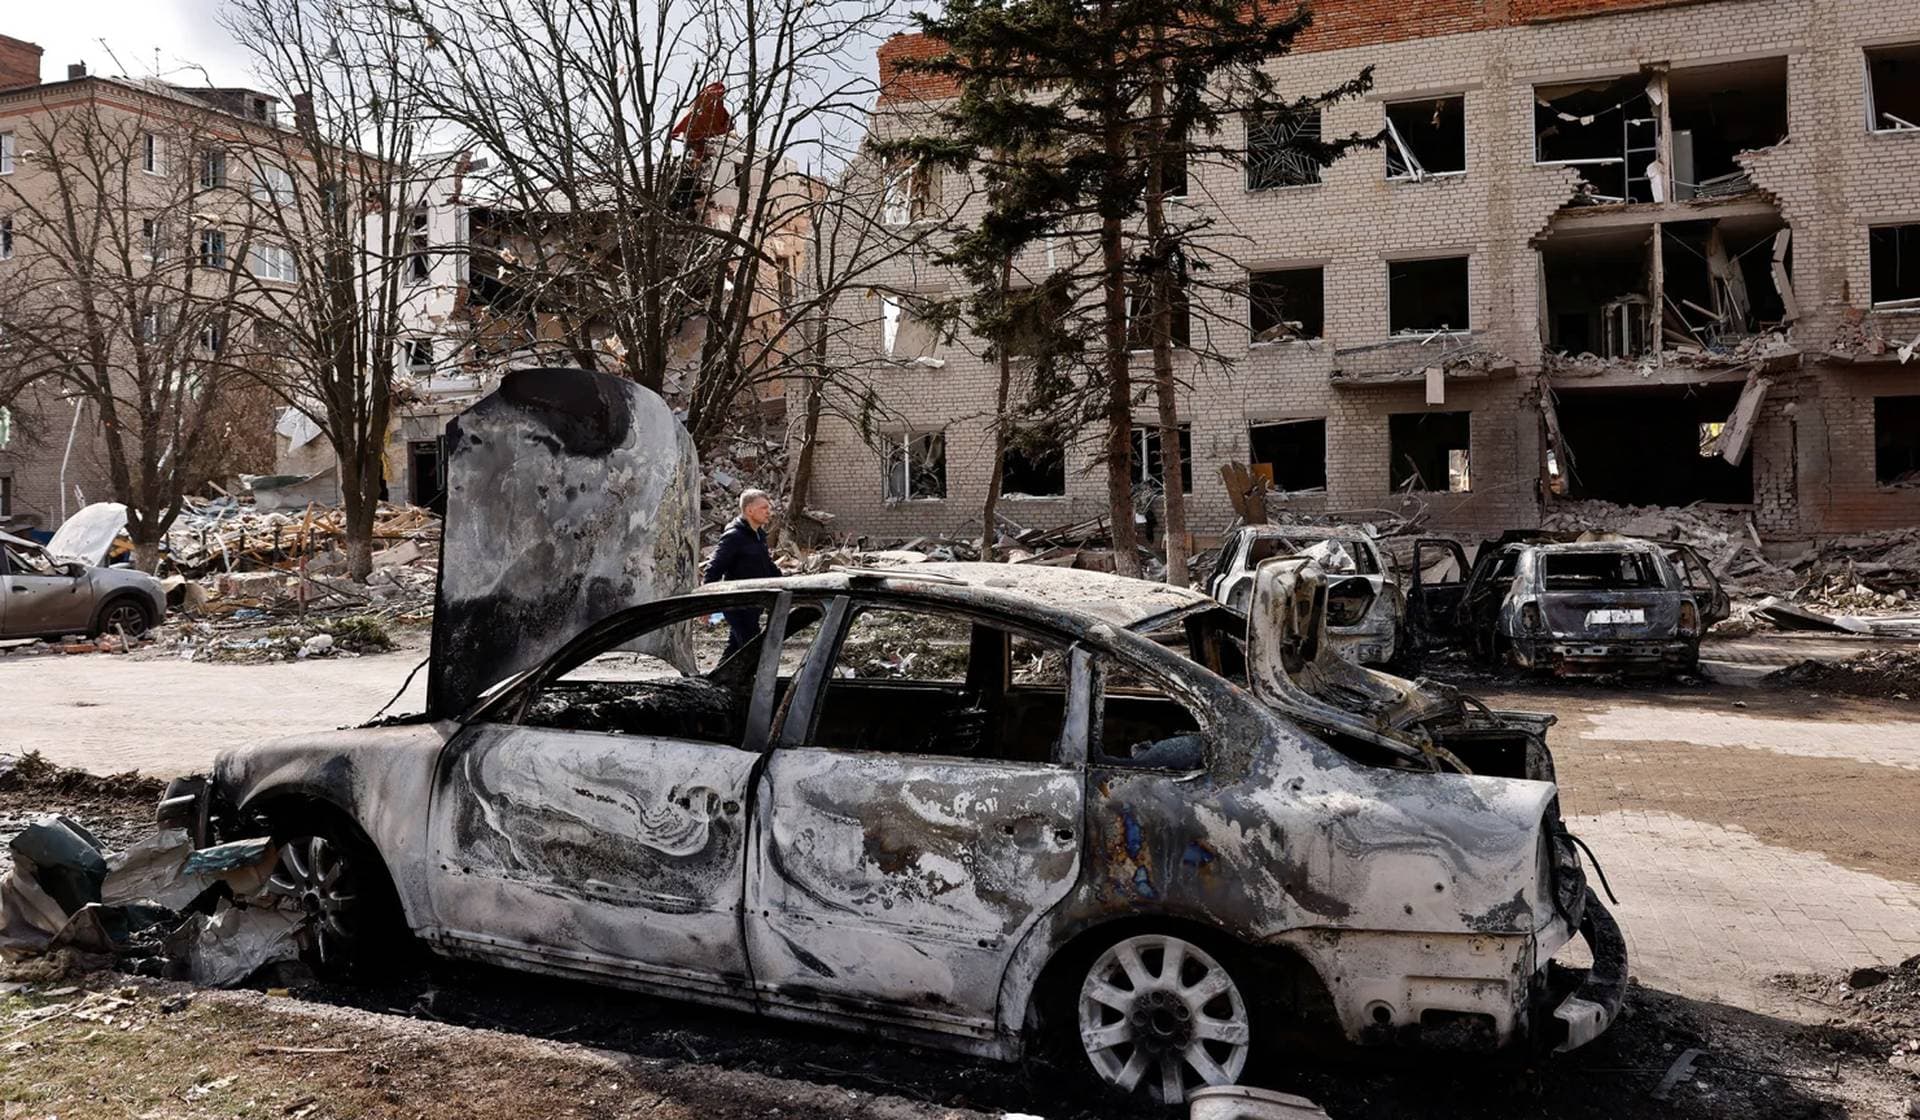 A person walks next to a damaged car in the aftermath of deadly shelling of an army office building in Sloviansk